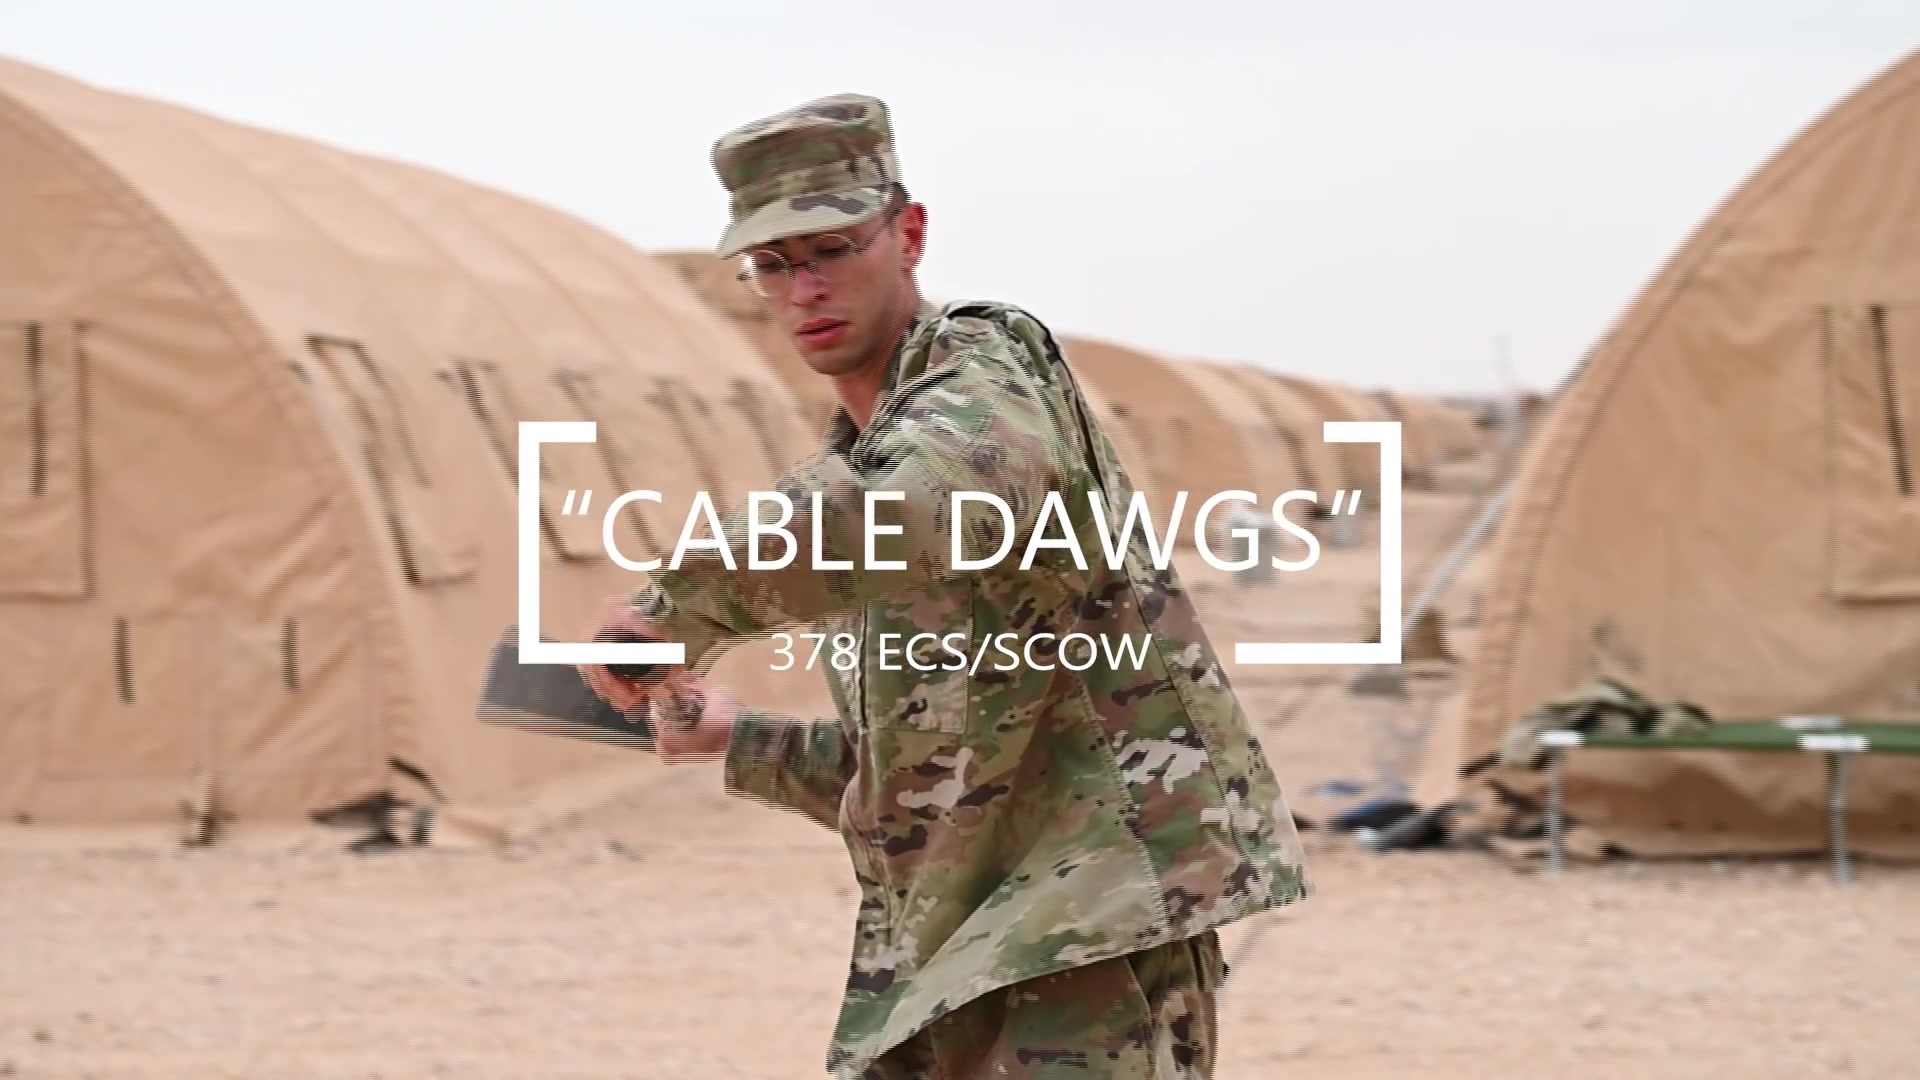 "Without comm, you're camping."

The 378 AEW's "Cable Dawgs" get their hands dirty to lay the foundation for base communication capabilities.